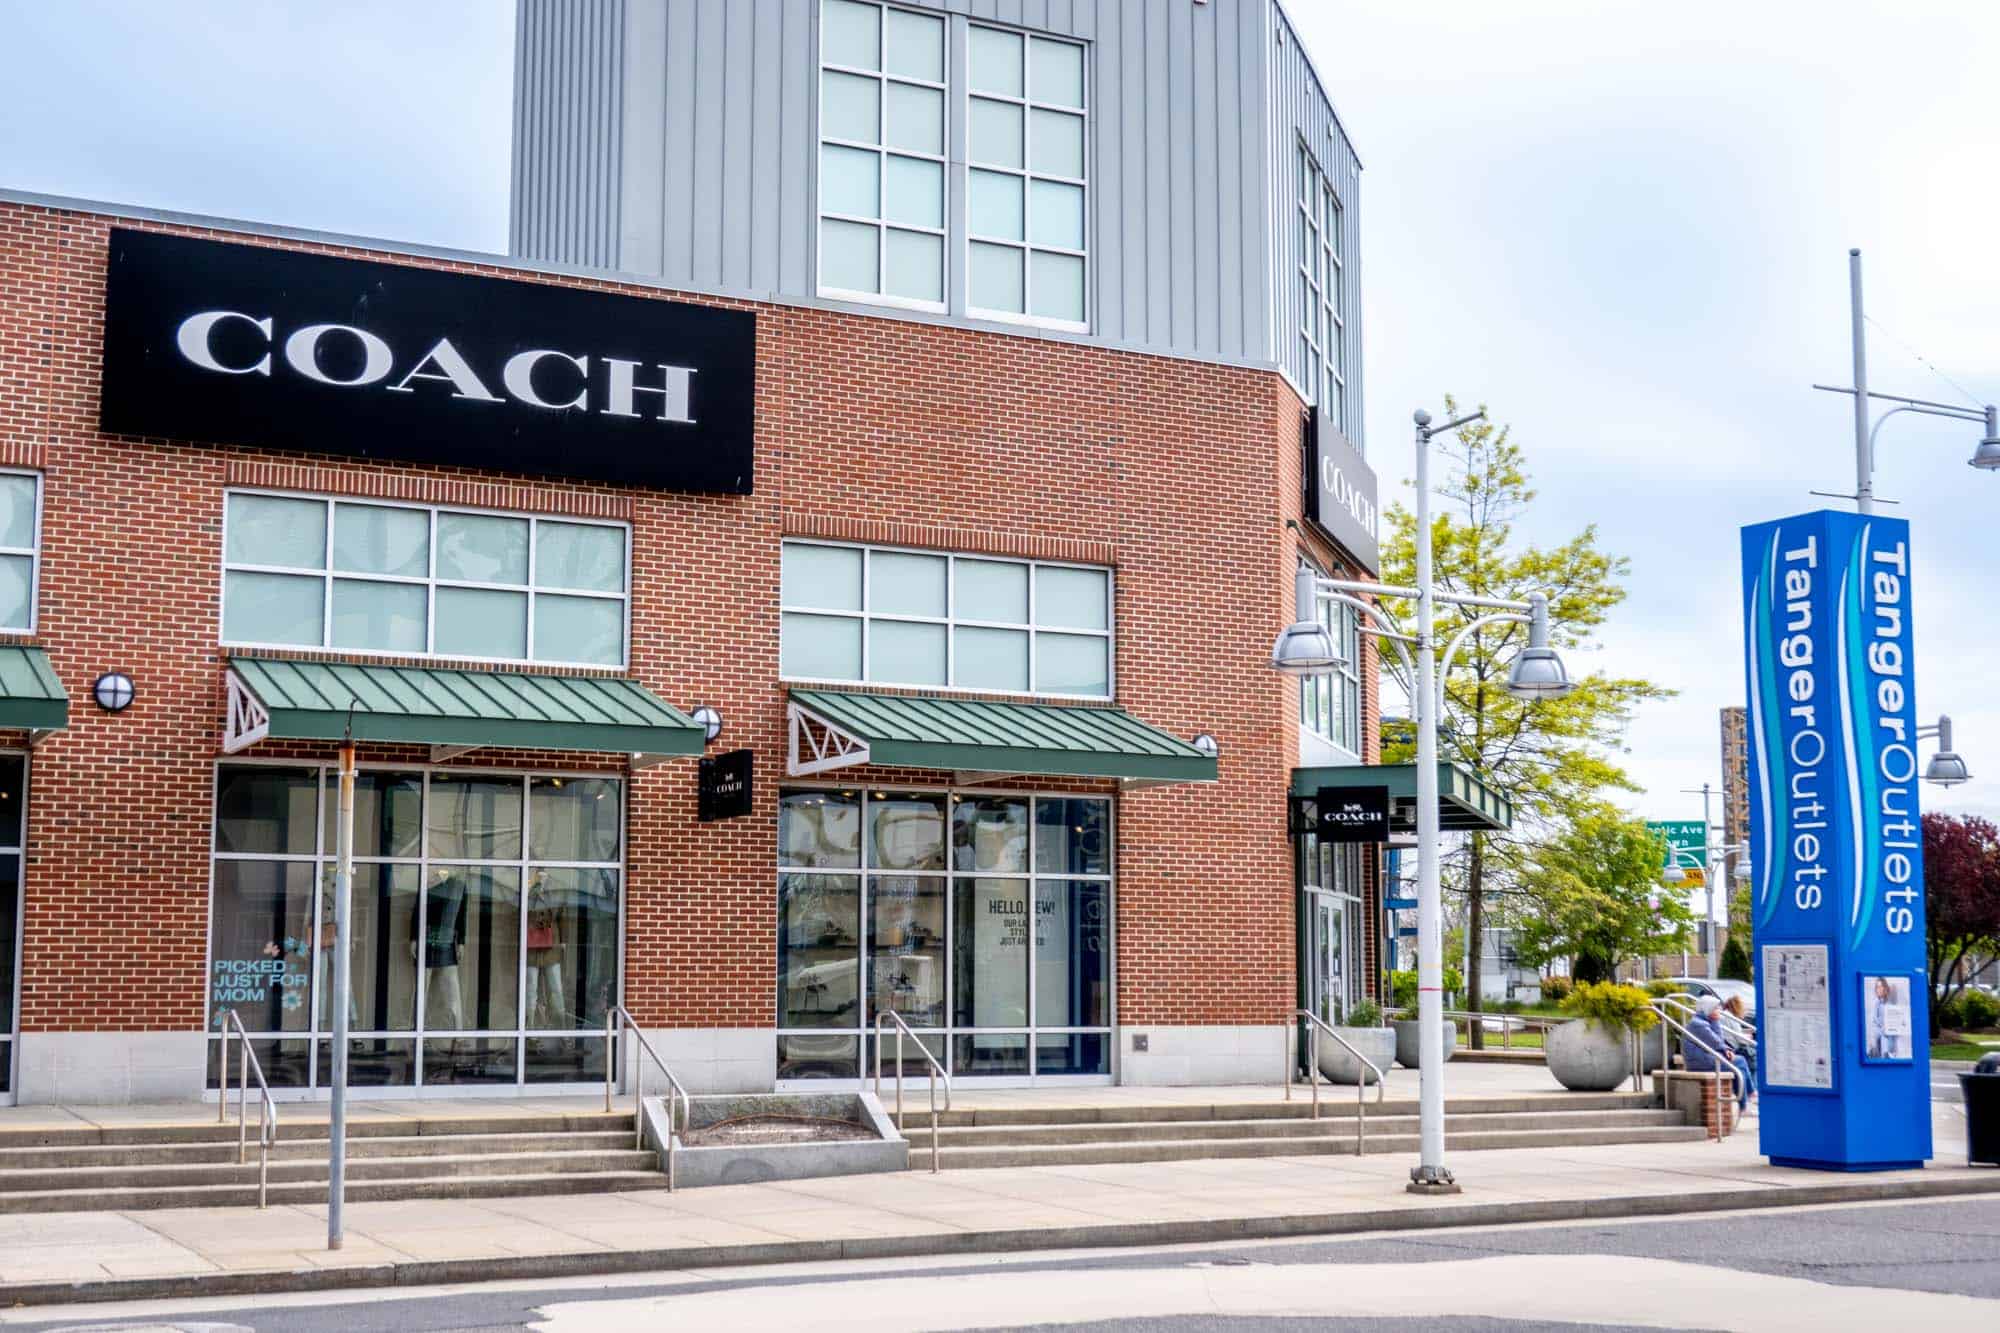 Brick building with green awnings and a sign for "Coach" next to a blue pillar with a sign for "Tanger Outlets."